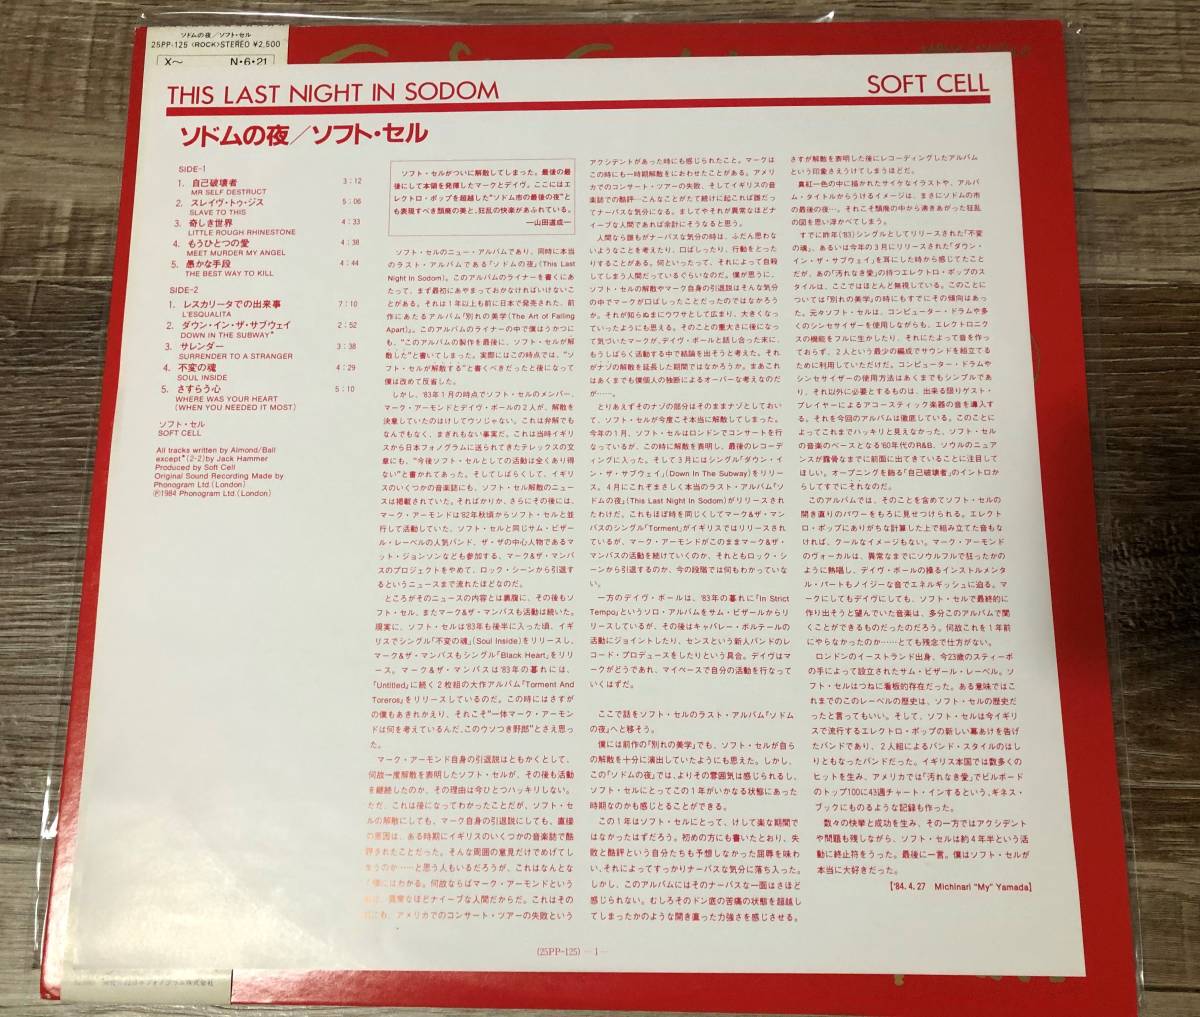 LP【New Wave】Soft Cell / This Last Night In Sodom【25PP-125 希少！国内盤帯付き・Marc Almon・ソフトセル・ソドムの夜】の画像3